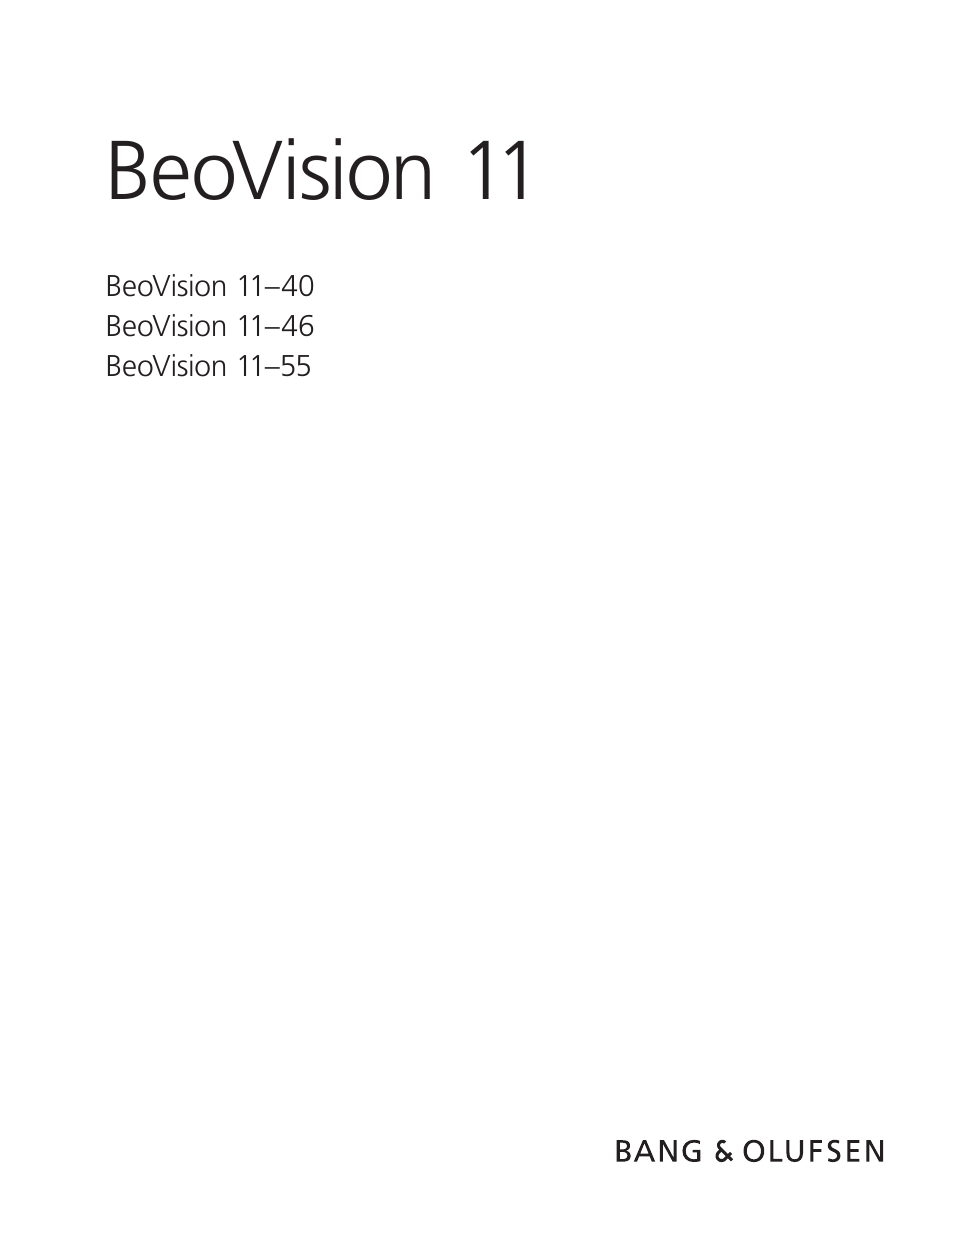 BeoVision 11 with Beo4 User Guide (No tuner)